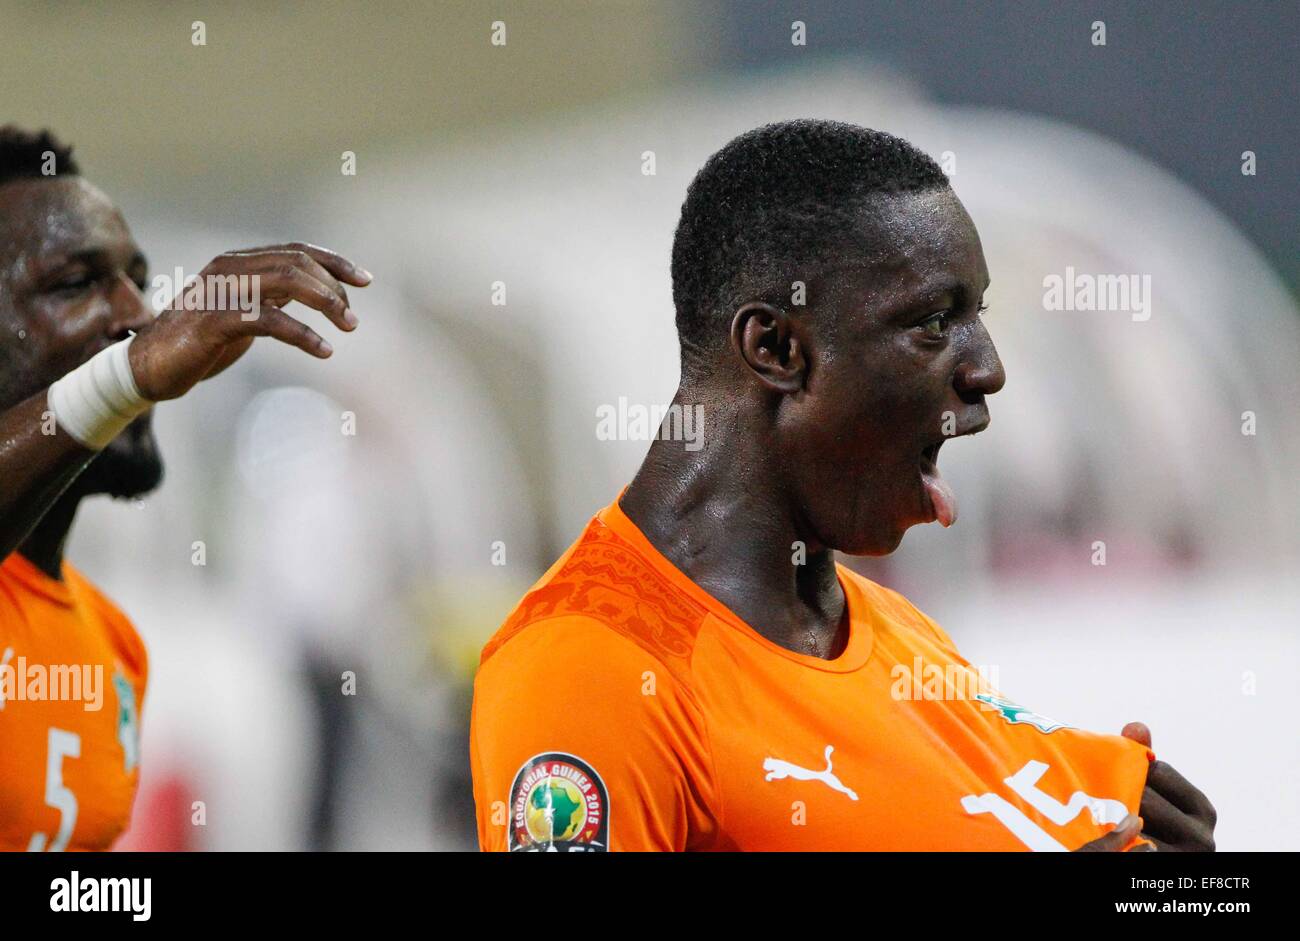 Malabo, Equatorial Guinea. 28th Jan, 2015. Max Alain Gradel (R) of Cote d'Ivoire celebrates his goal during the group match of Africa Cup of Nations against Cameroon at the Stadium of Malabo, Equatorial Guinea, Jan. 28, 2015. Cote d'Ivoire won 1-0. Credit:  Li Jing/Xinhua/Alamy Live News Stock Photo